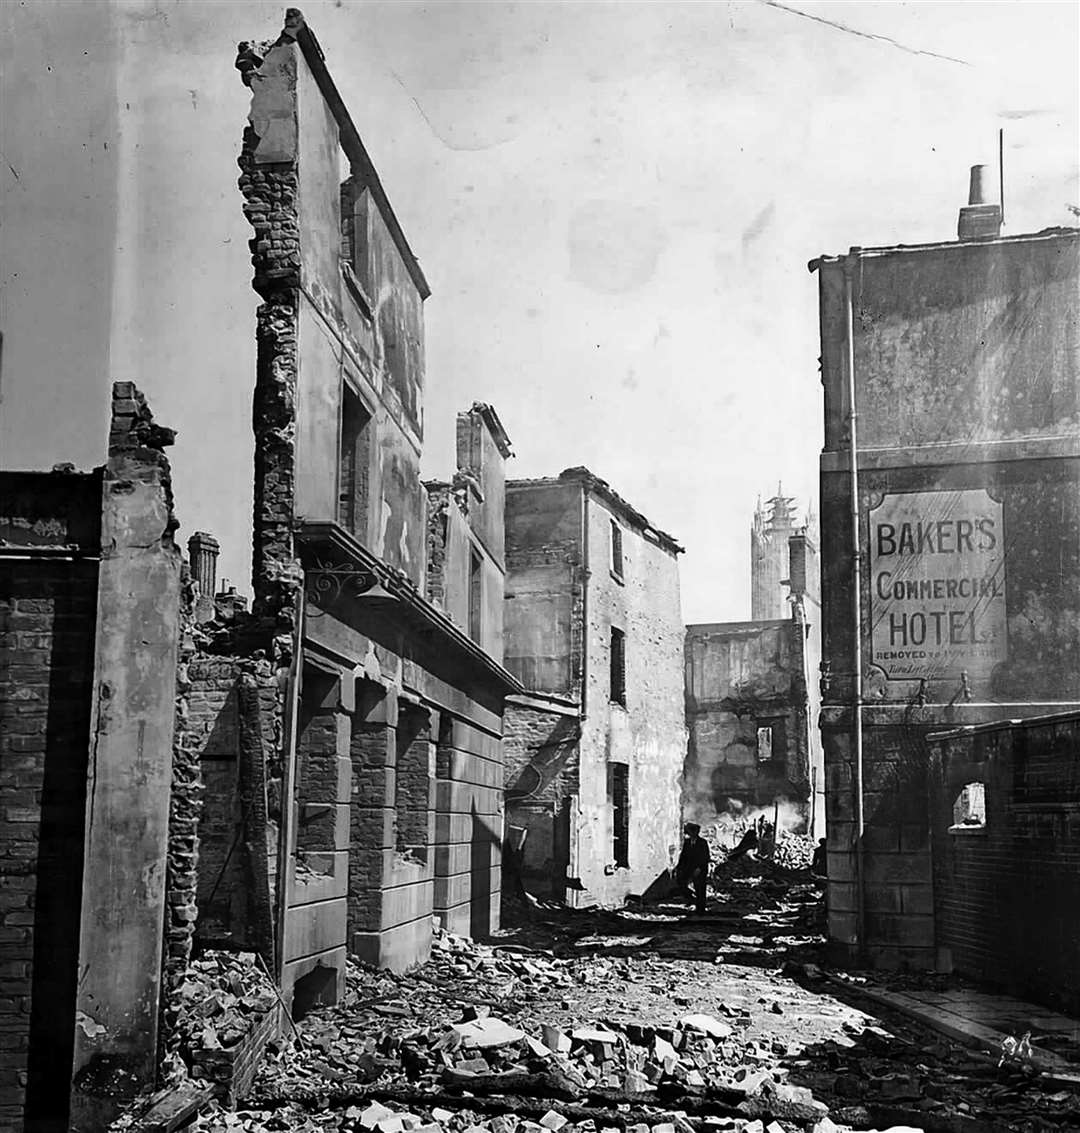 The ruins of Rose Lane after the Blitz of June 1942